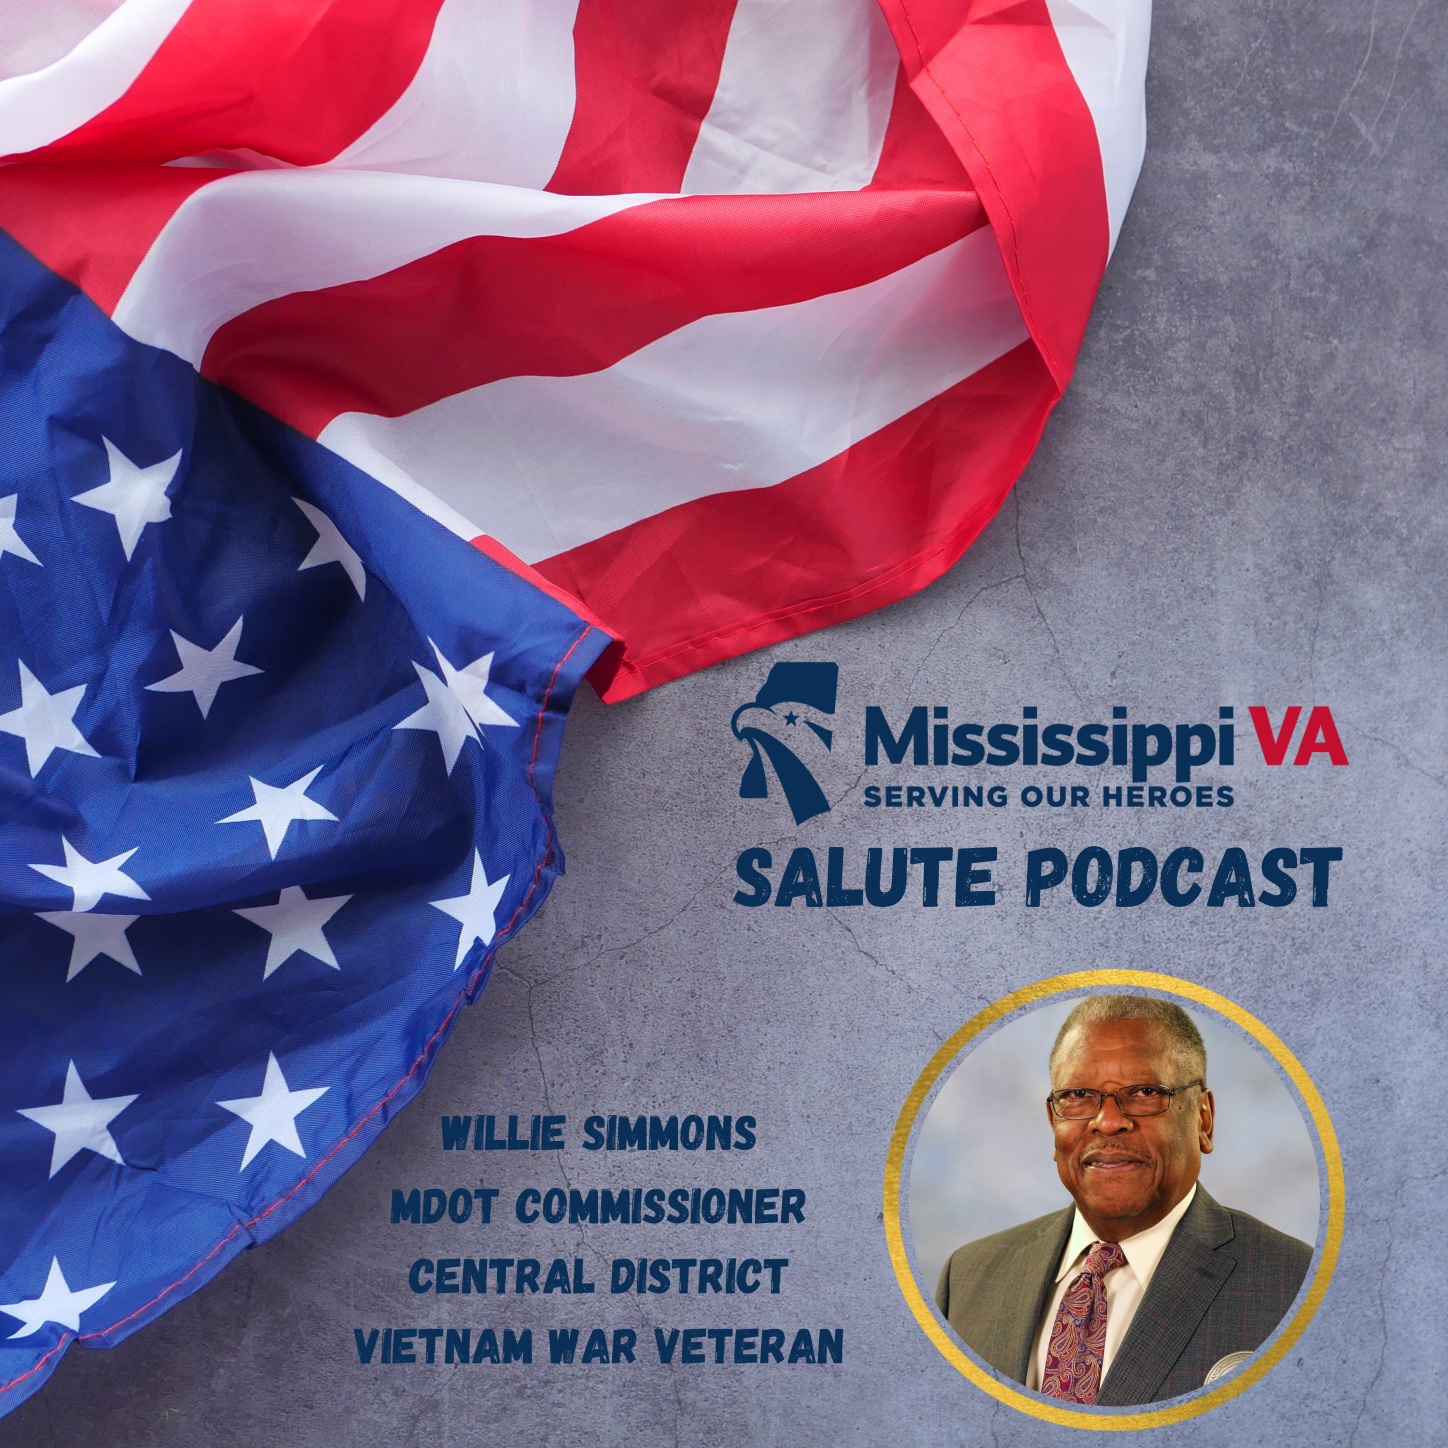 Salute Episode Cover Art - Willie Simmons.png